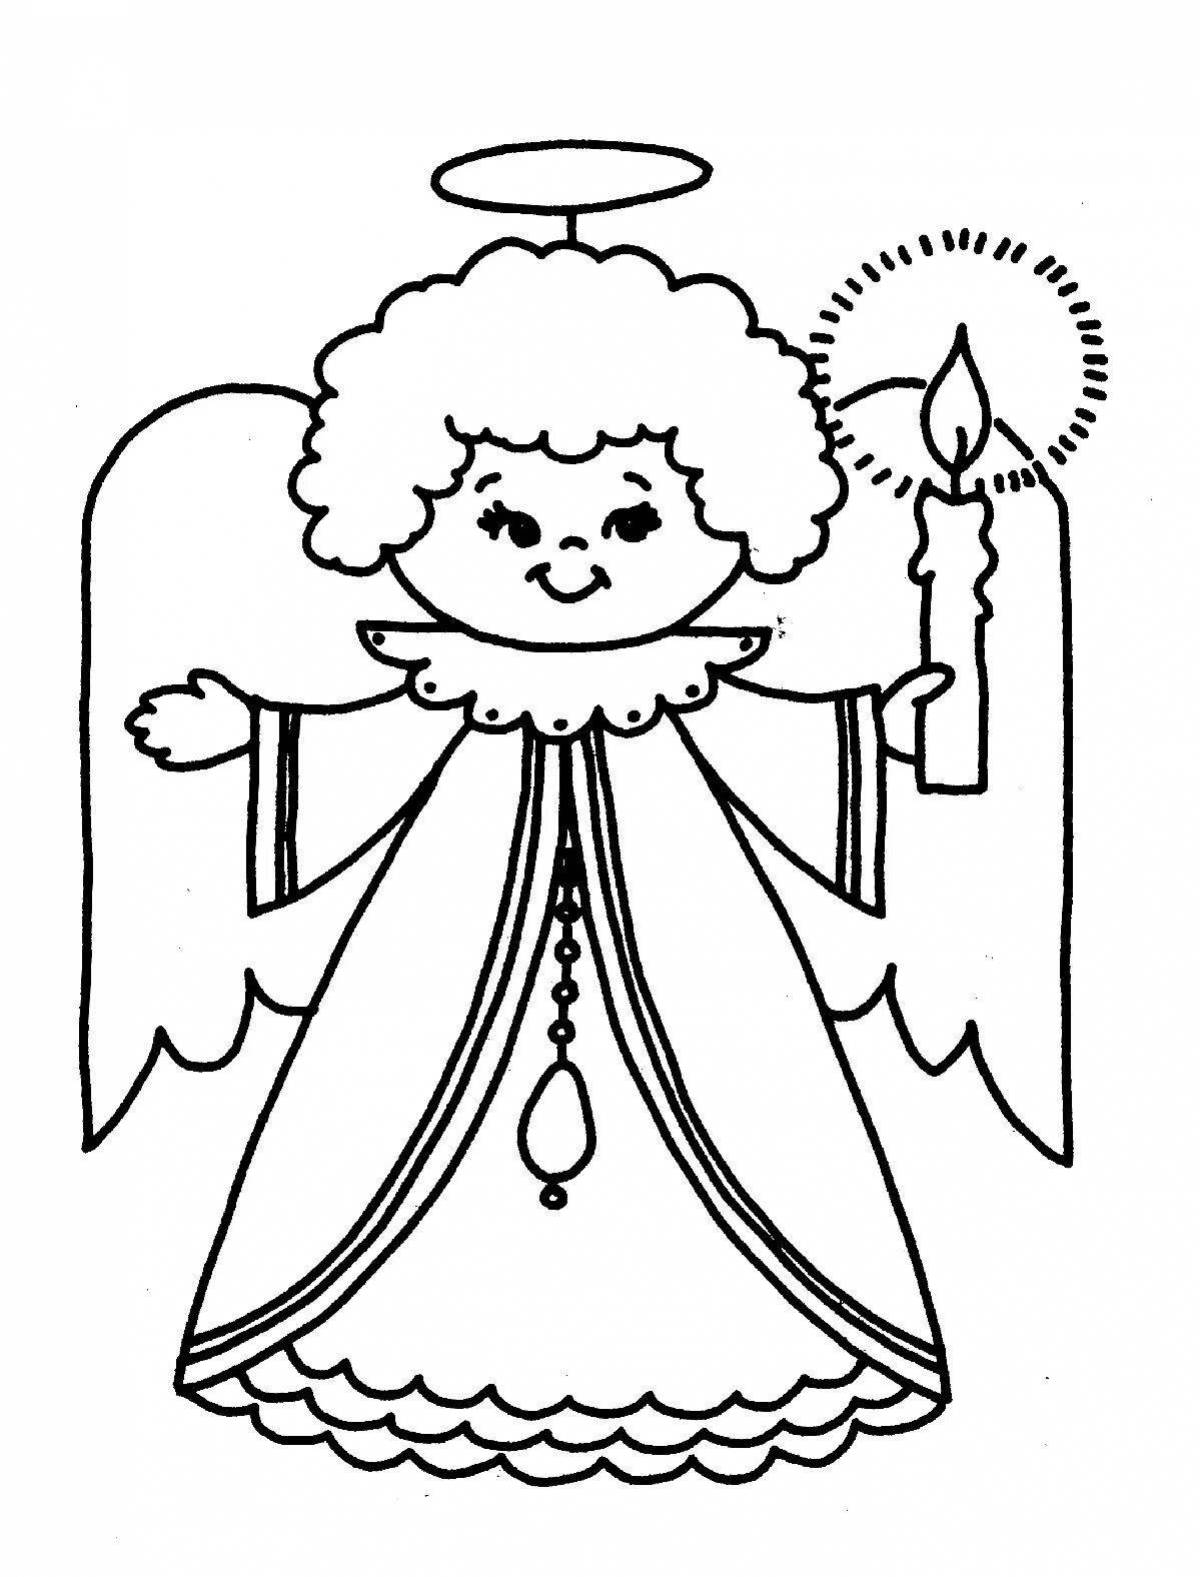 Coloring book glowing Christmas angels